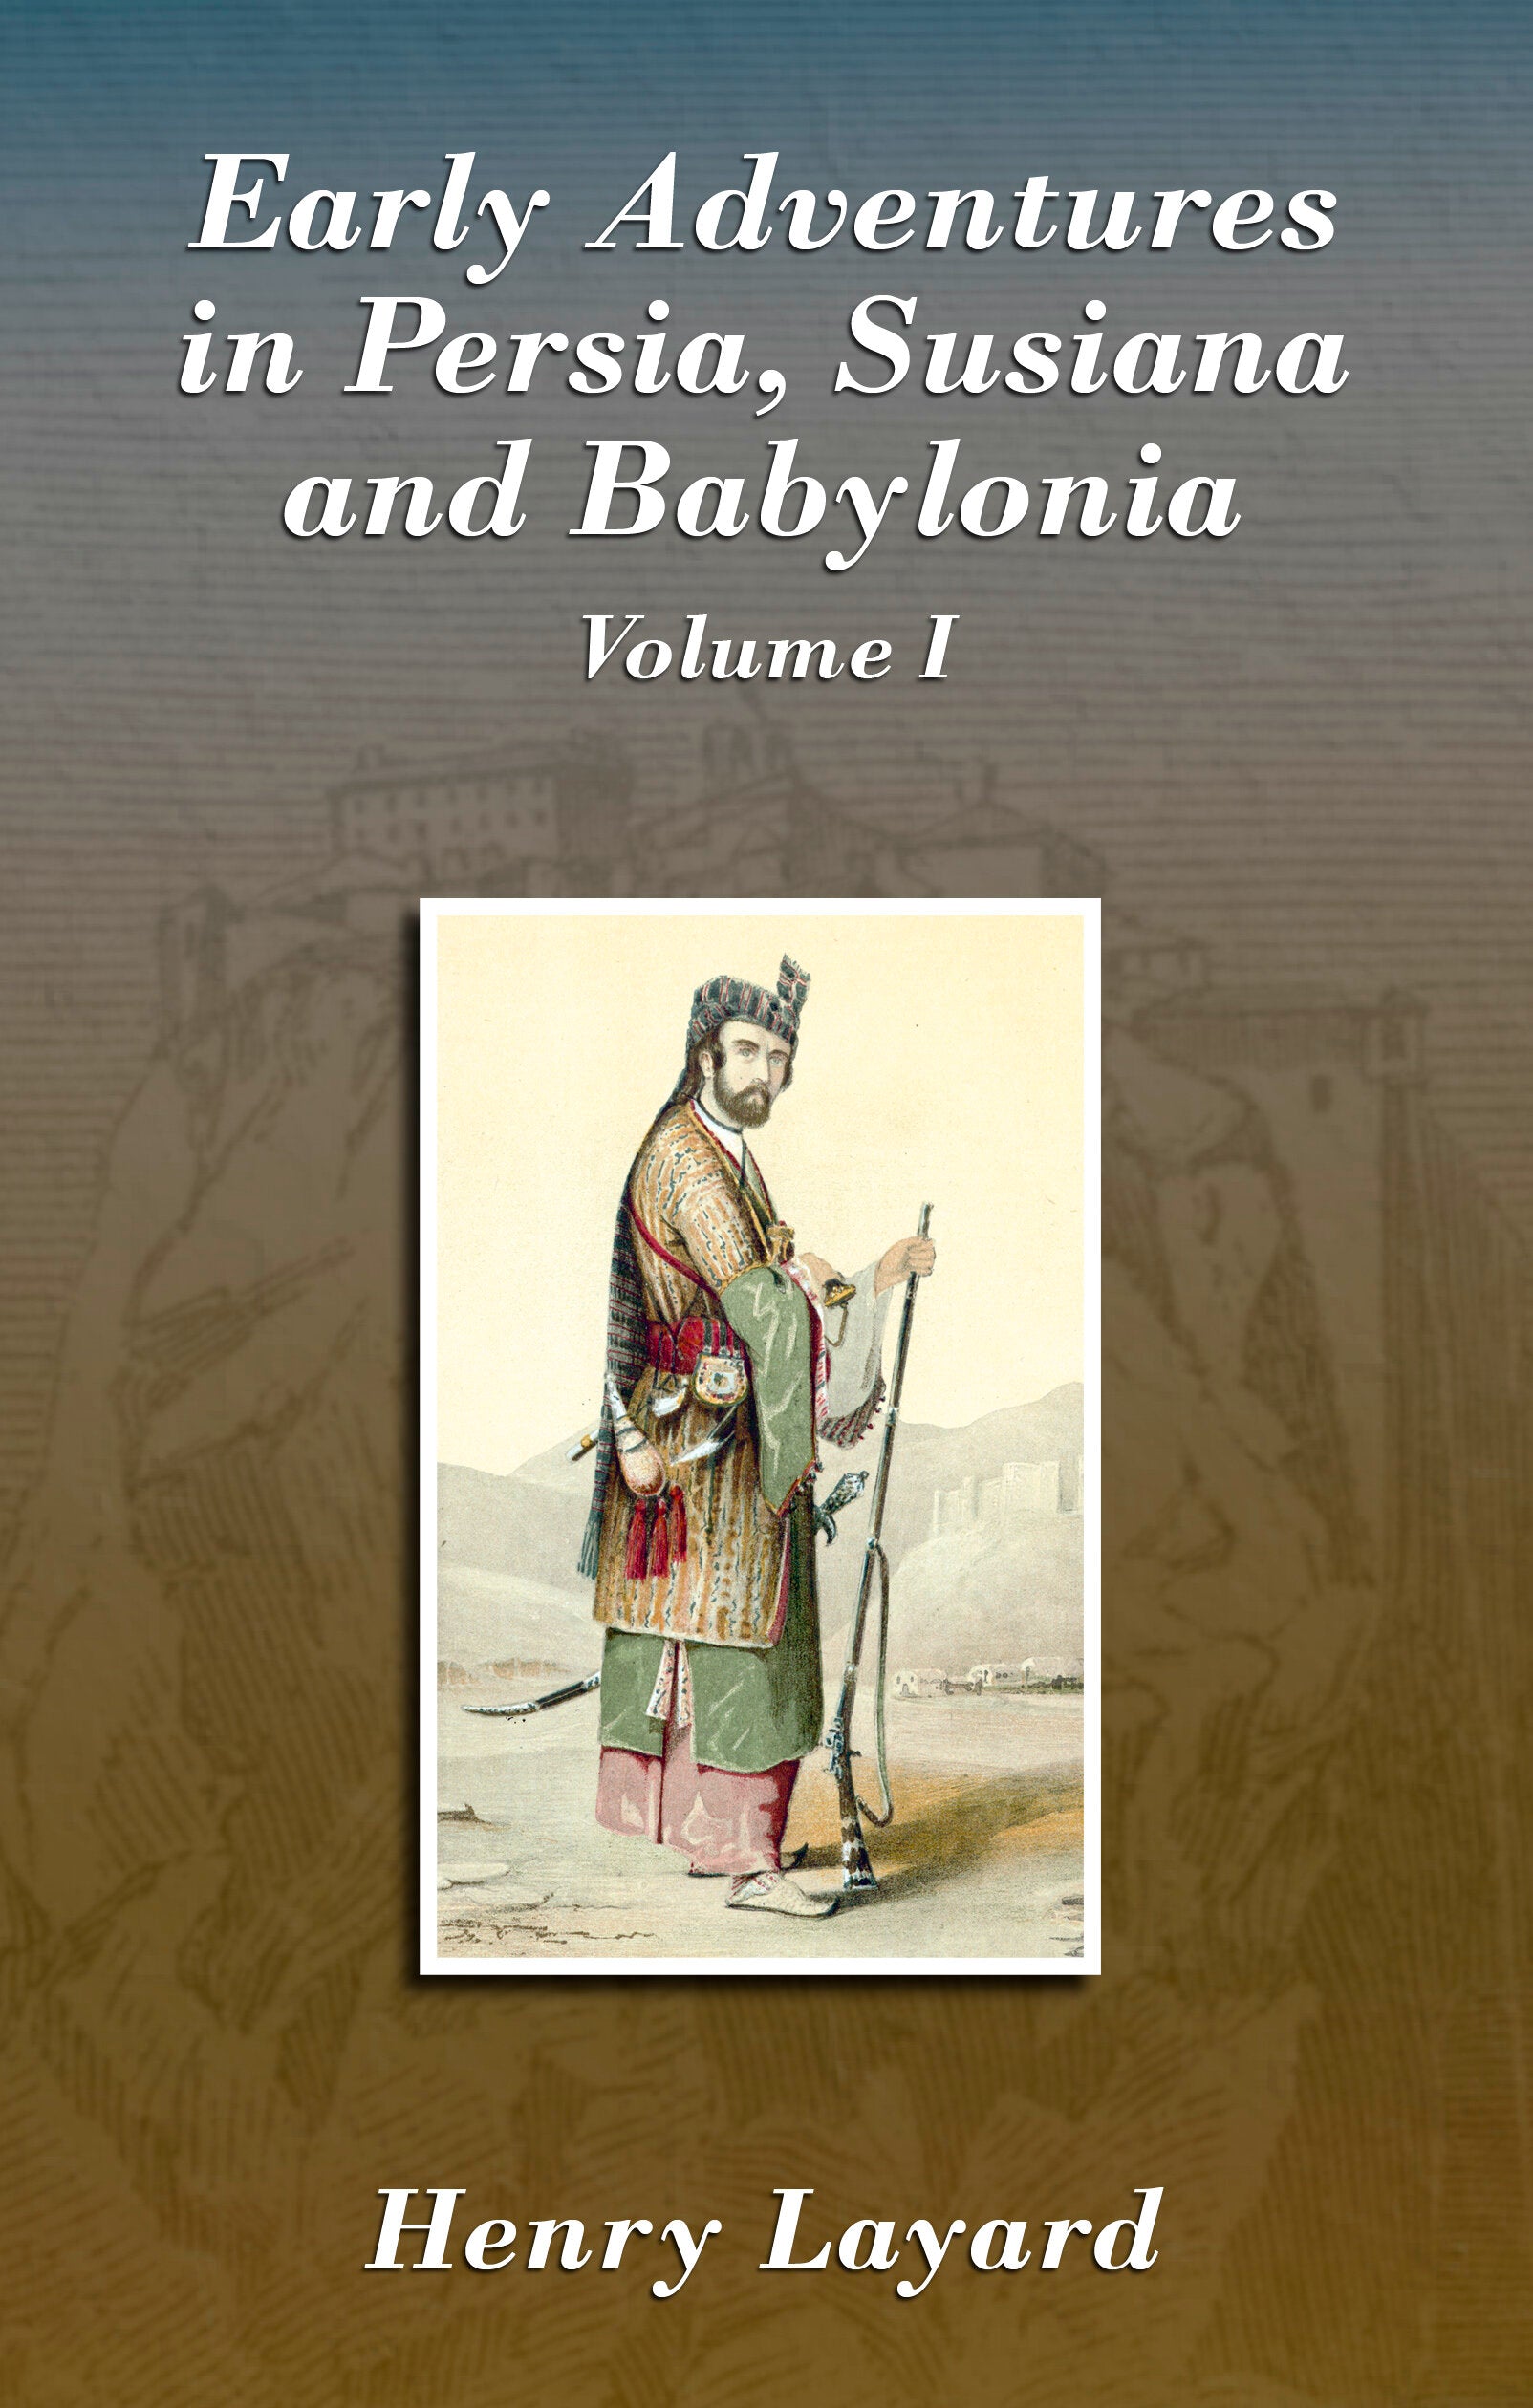 Early Adventures in Persia, Susiana, and Babylonia: Volume 1